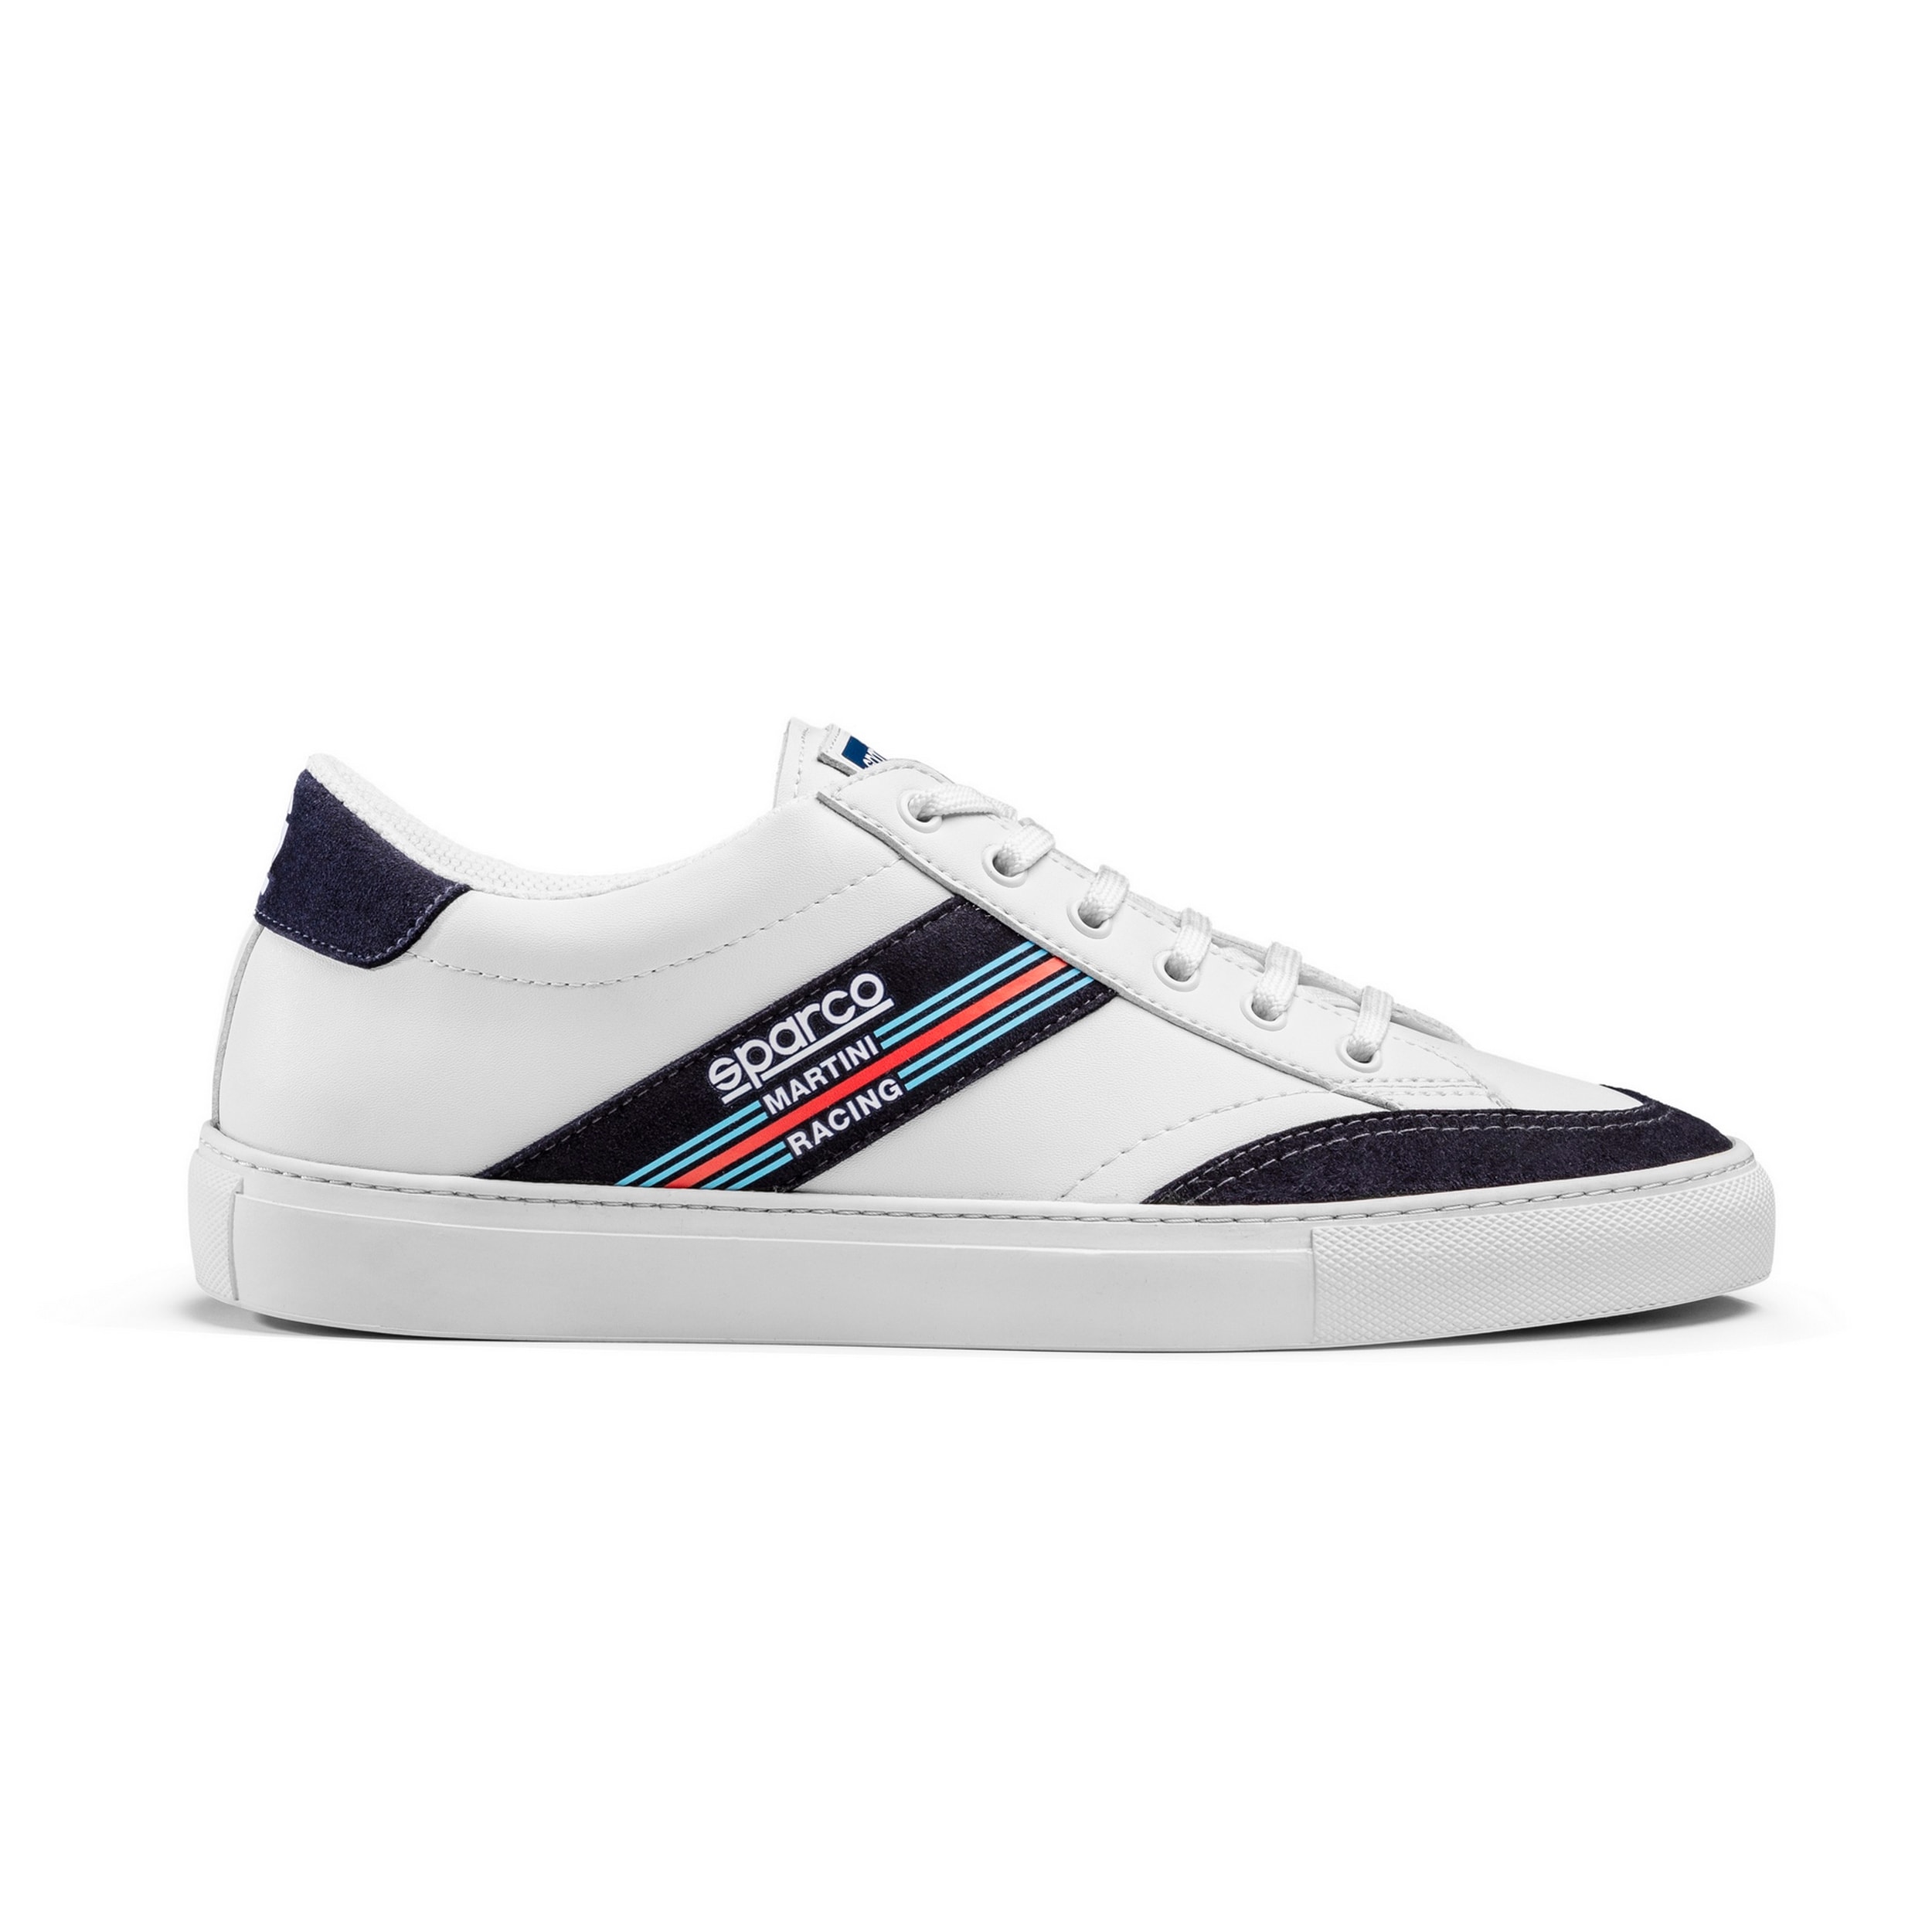 Shoes Sparco S-Time Martini Racing Sneakers White/